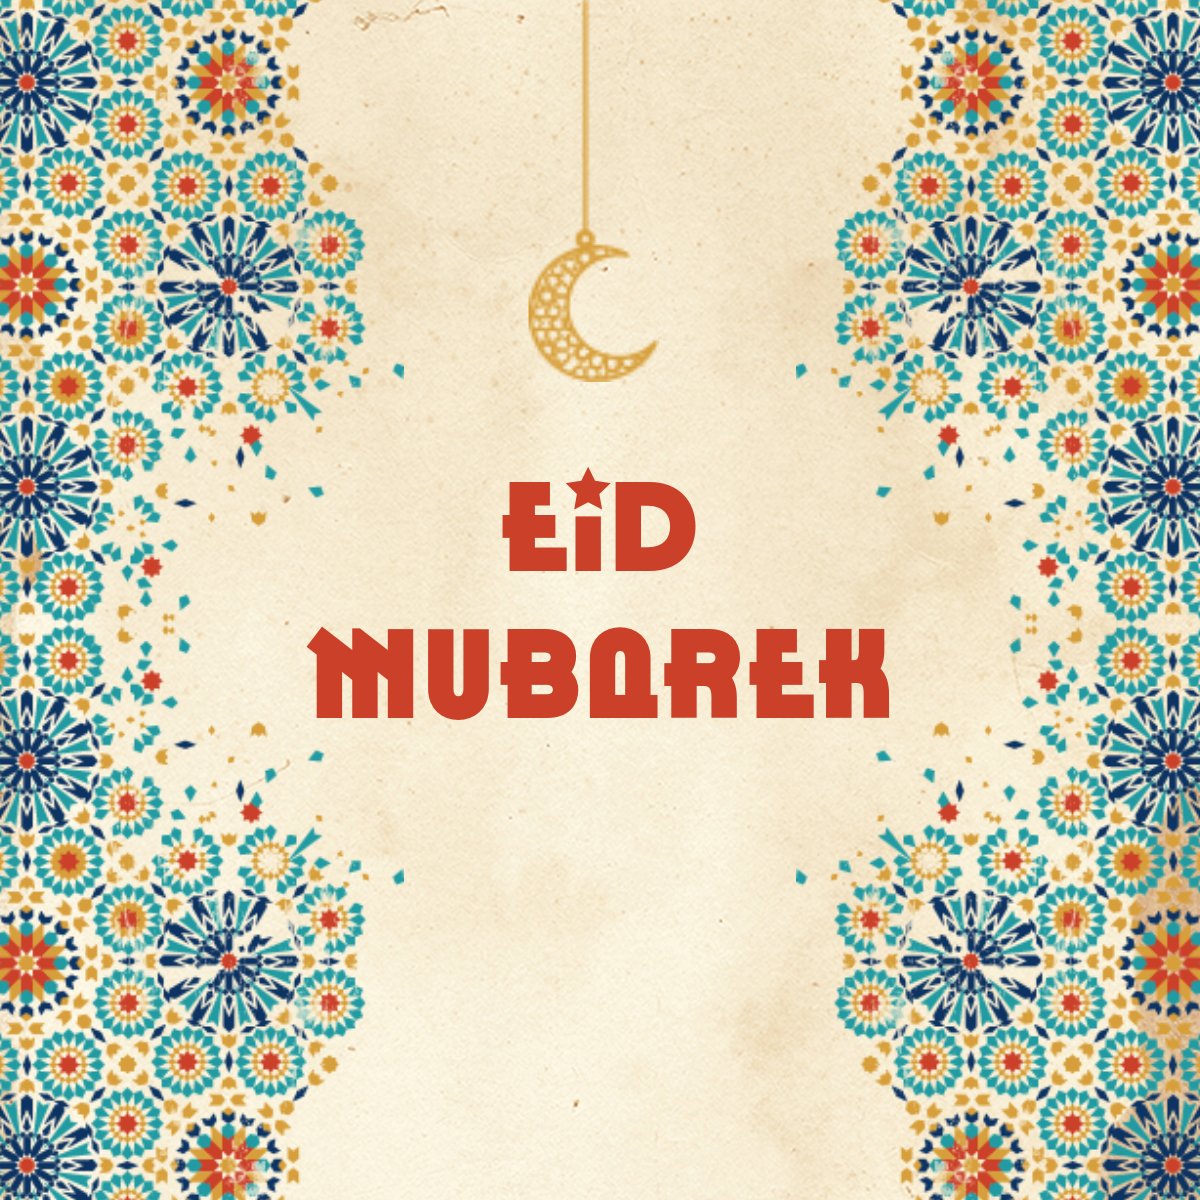 Wishing Eid Mubarak to all those who are celebrating! May this Eid bring you and your loved ones joy, peace, and prosperity.